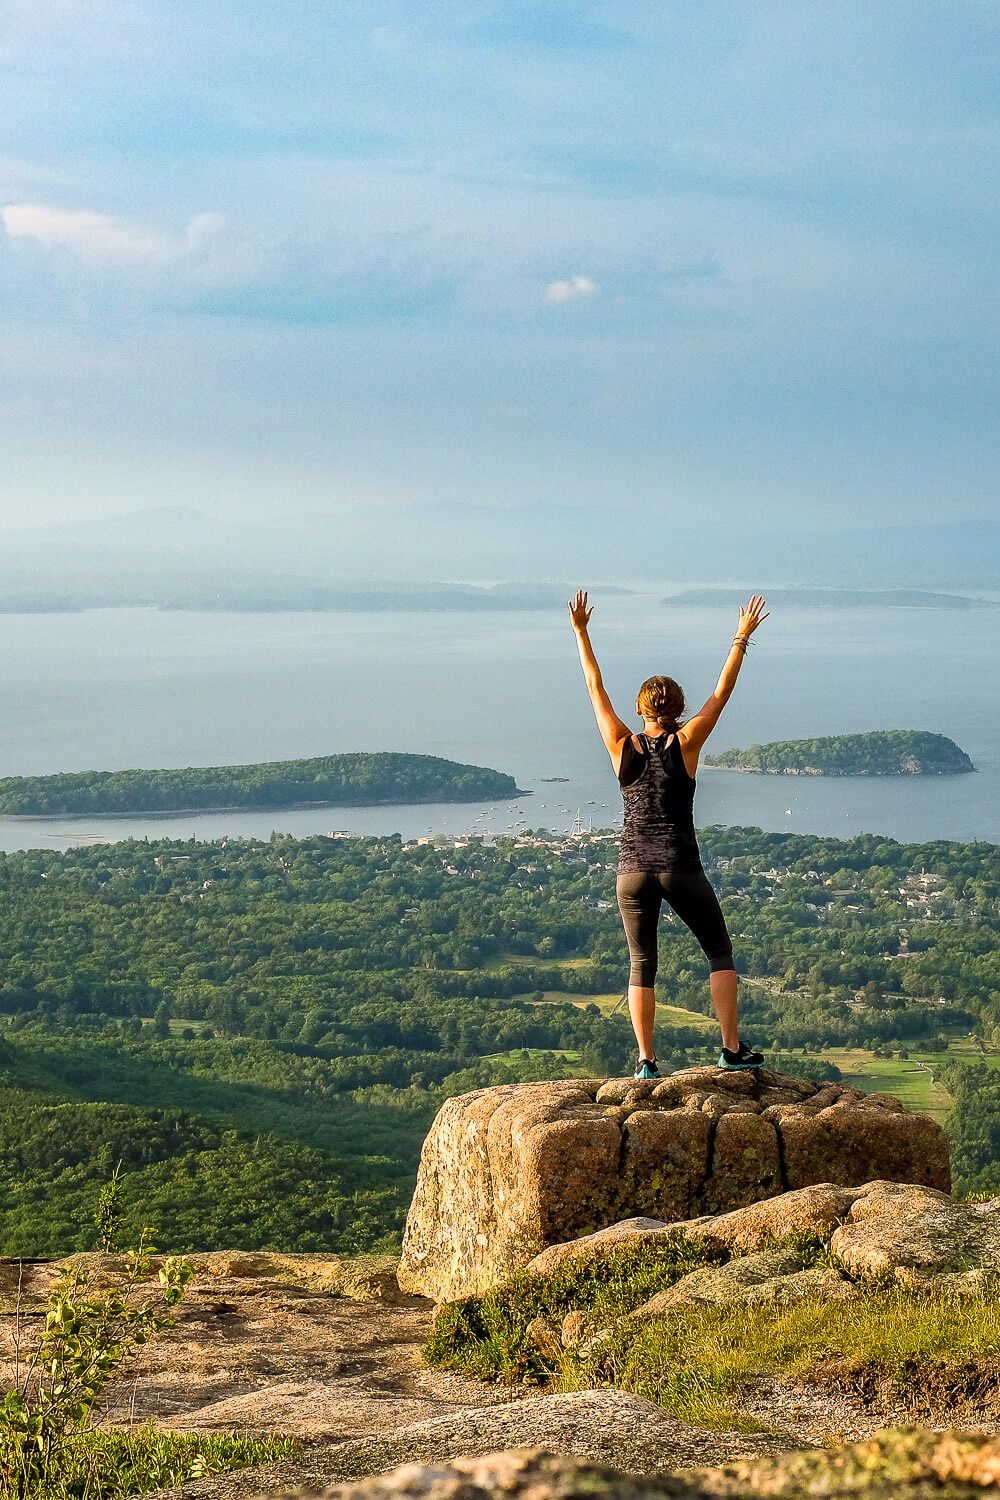 cadillac mountain: One day in acadia national park